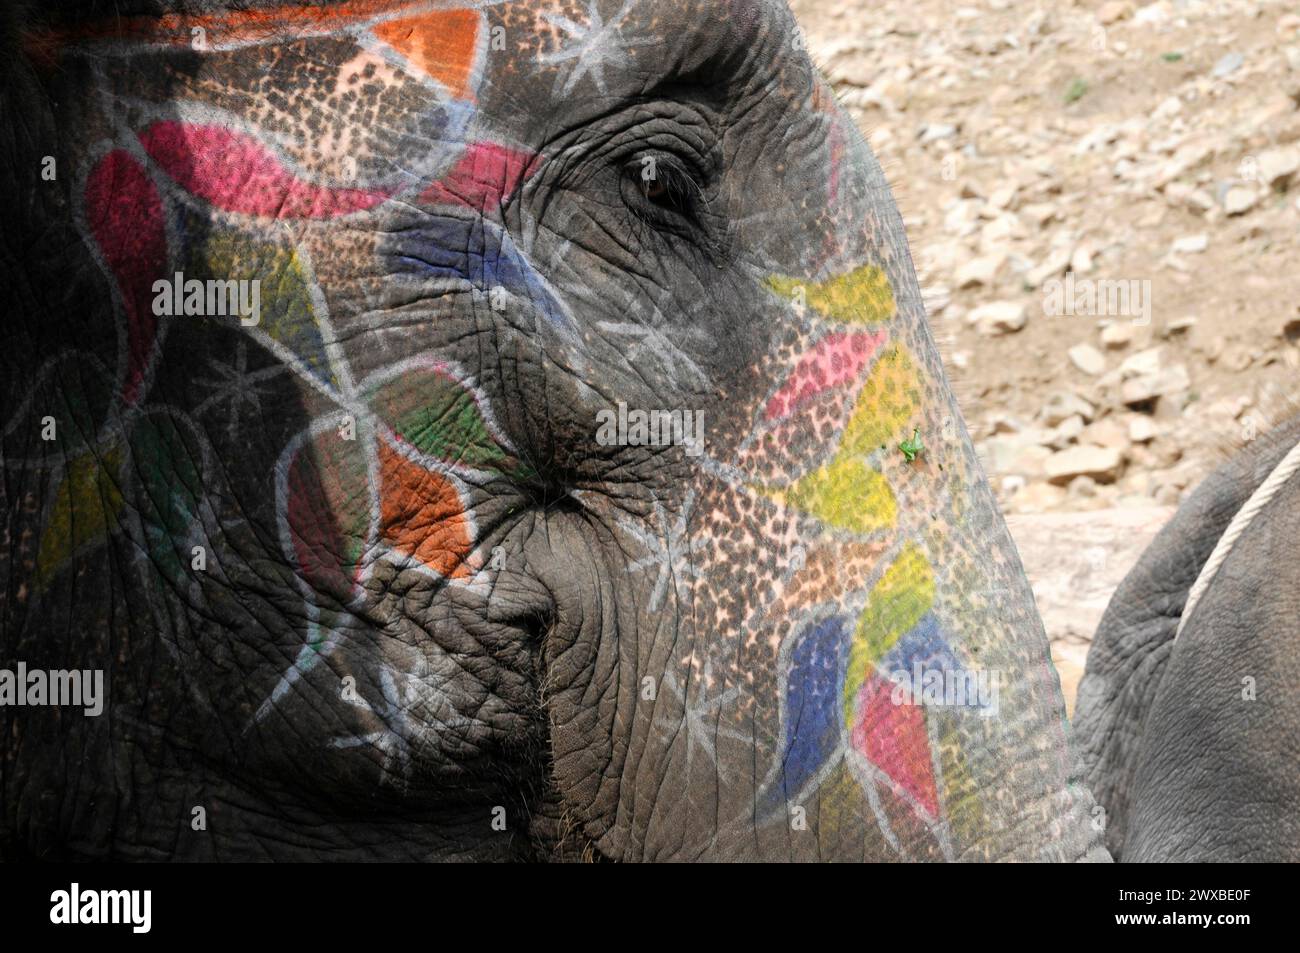 Riding elephants at Amber Fort, Amber, near Jaipur, Rajasthan, close-up of a colourfully painted elephant face with focus on the texture of the skin Stock Photo